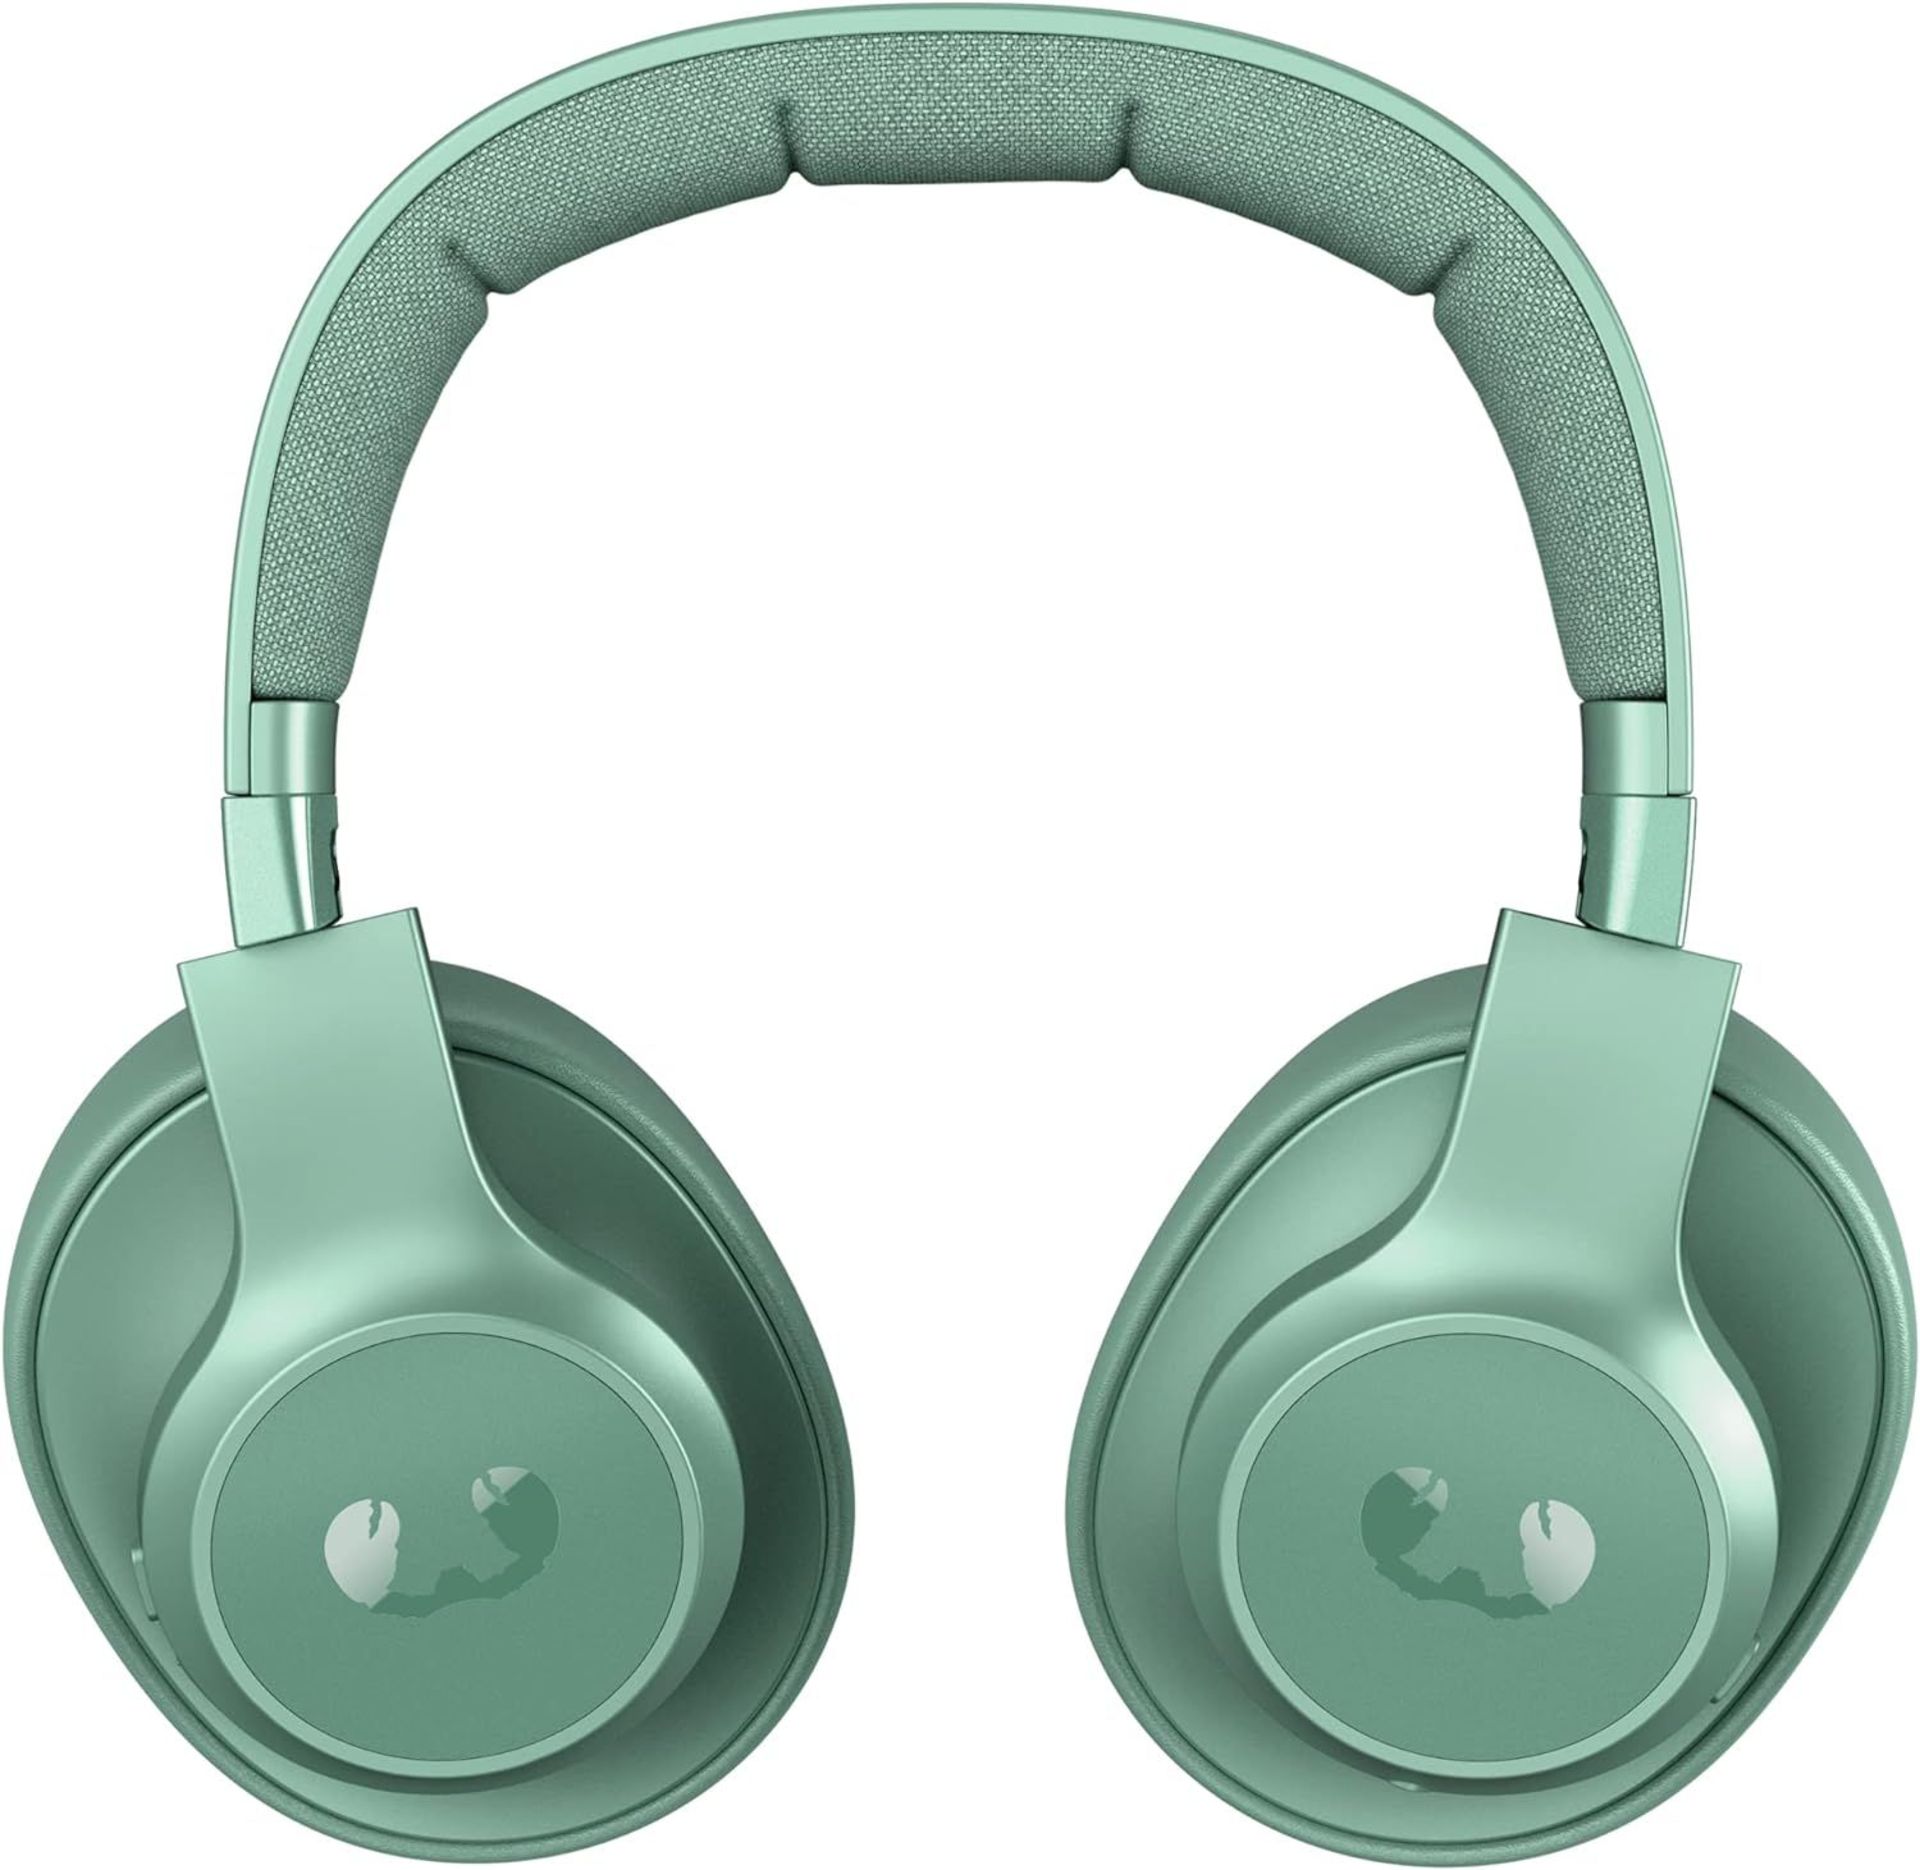 Fresh ’n Rebel Clam ANC Headphones Misty Mint |Over-ear Wireless Bluetooth Headphones with Active - Image 3 of 3